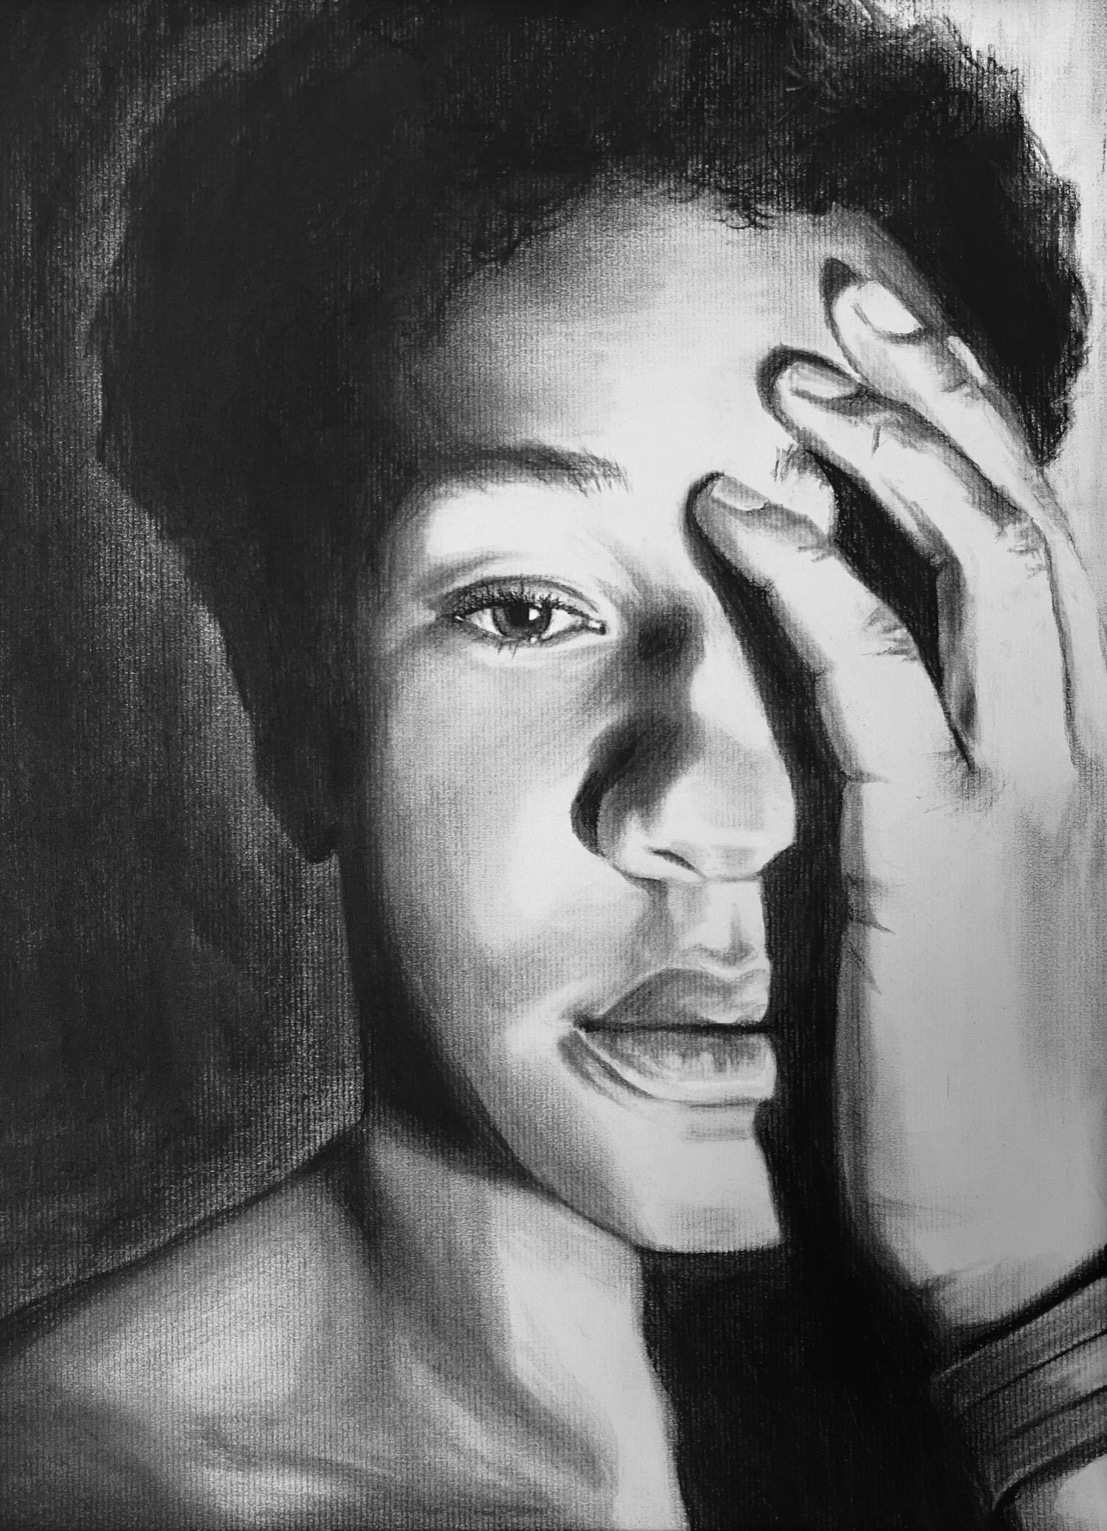 Charcoal Drawing 16 x 20" framed| $700 Click to view details